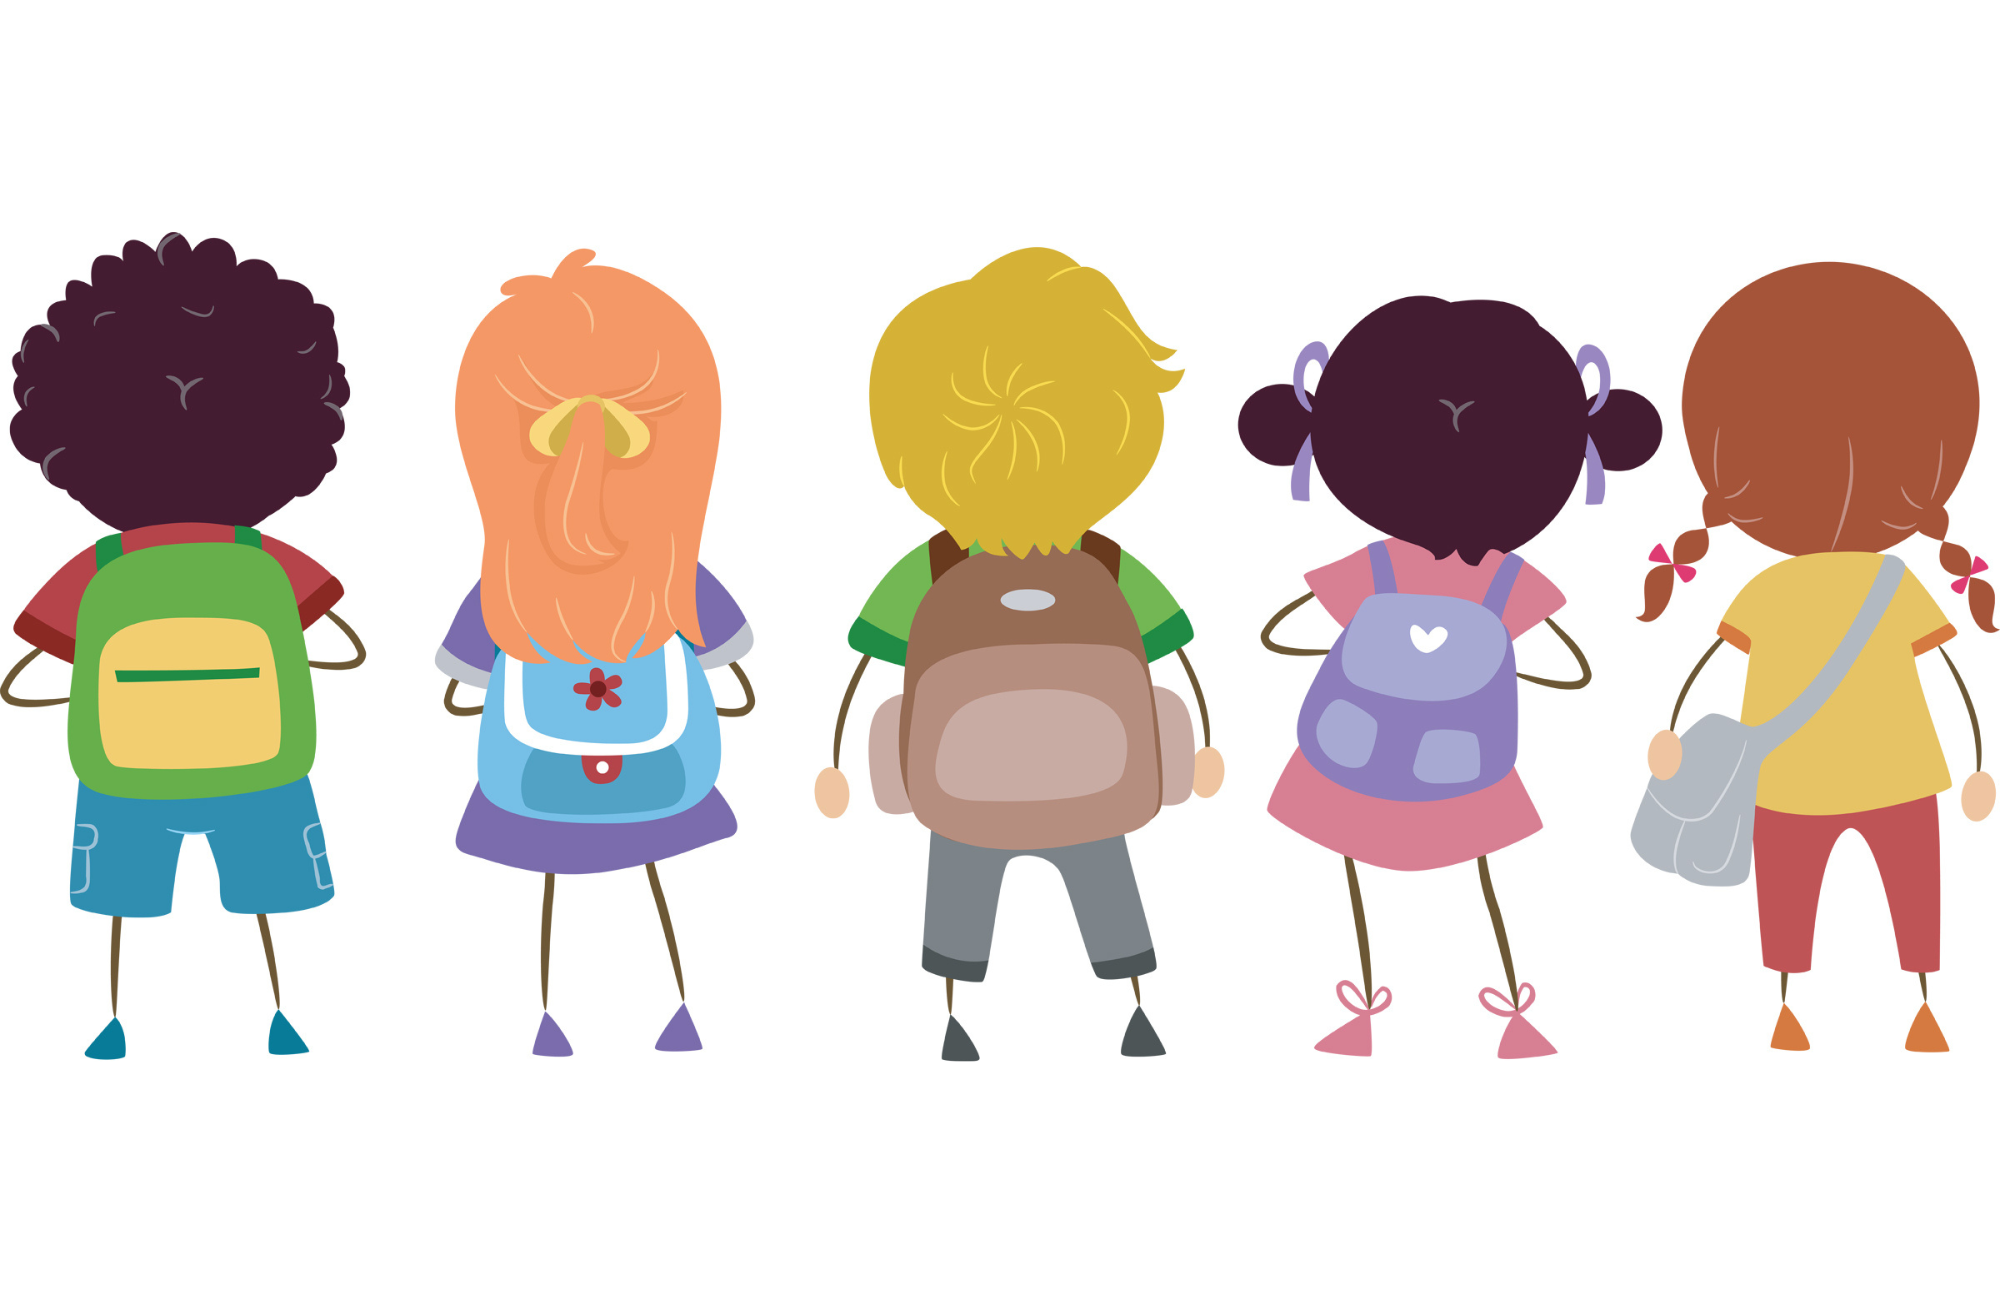 Children standing in a line wearing backpacks